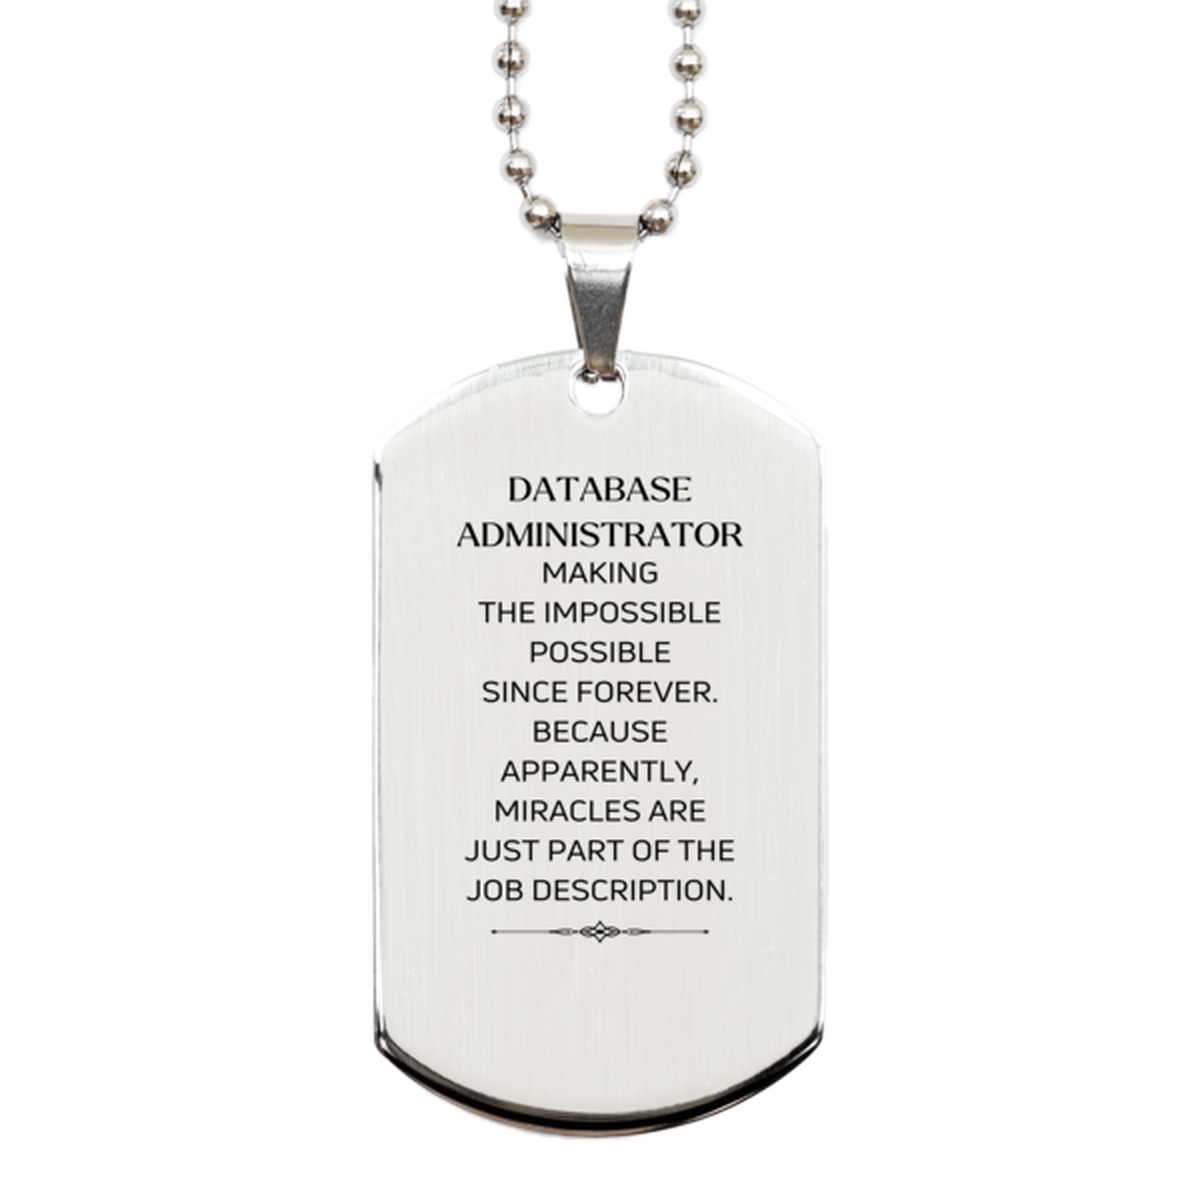 Funny Database Administrator Gifts, Miracles are just part of the job description, Inspirational Birthday Silver Dog Tag For Database Administrator, Men, Women, Coworkers, Friends, Boss